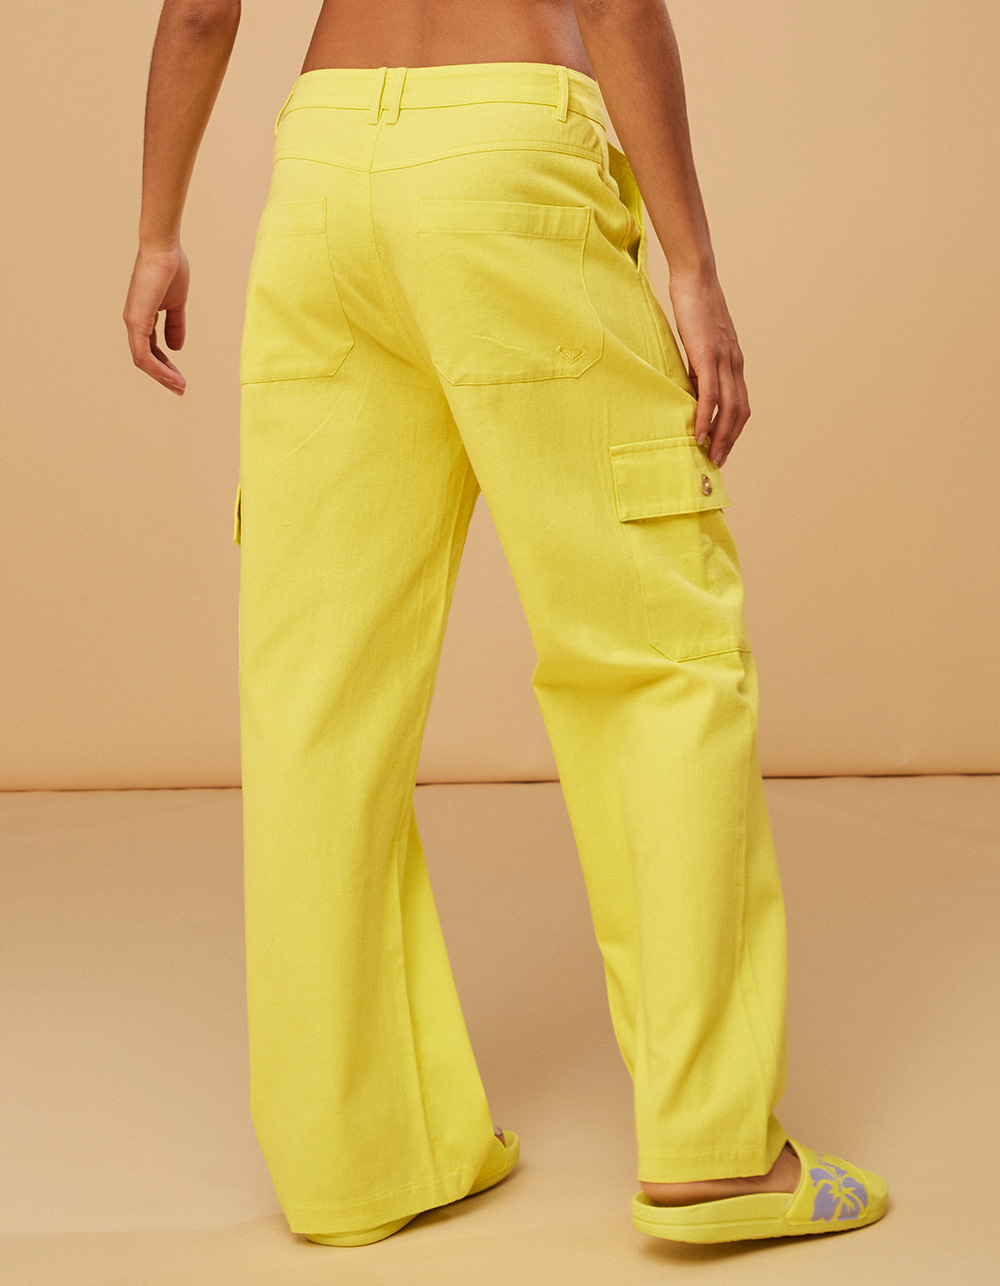 Tillys YELLOW Pants x Cargo | Womens Kind Kate Bosworth Kate - Surf ROXY